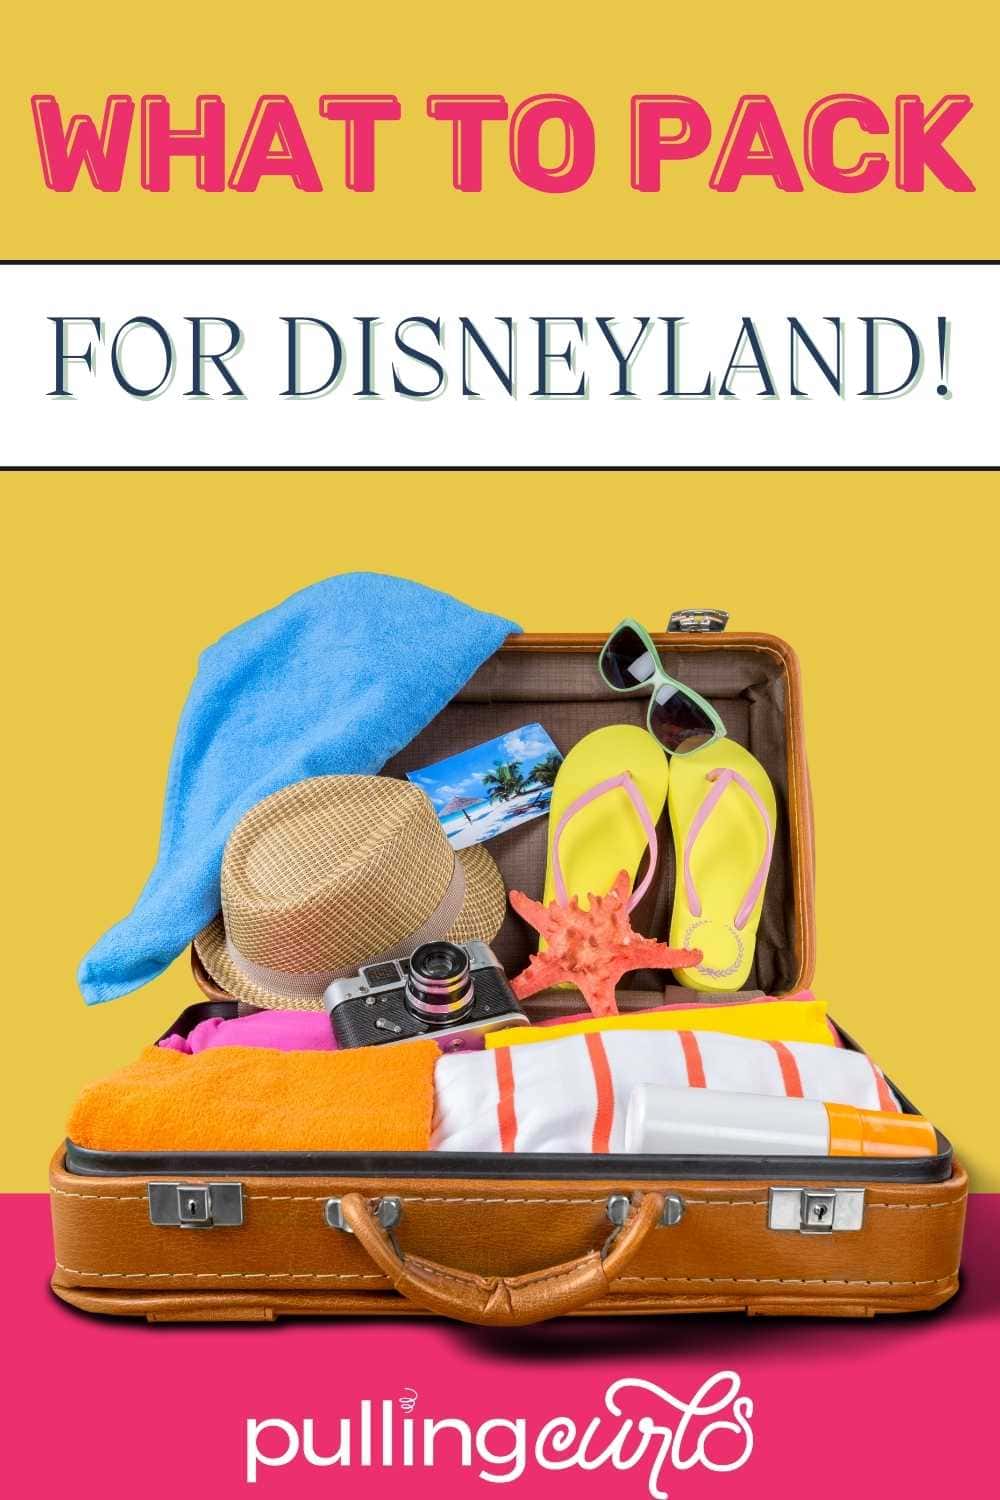 Disneyland packing list | for adults | kids | ideas | road trips | essentials | pack light | what to bring | printable #disneyland #luggage #packing #travel via @pullingcurls